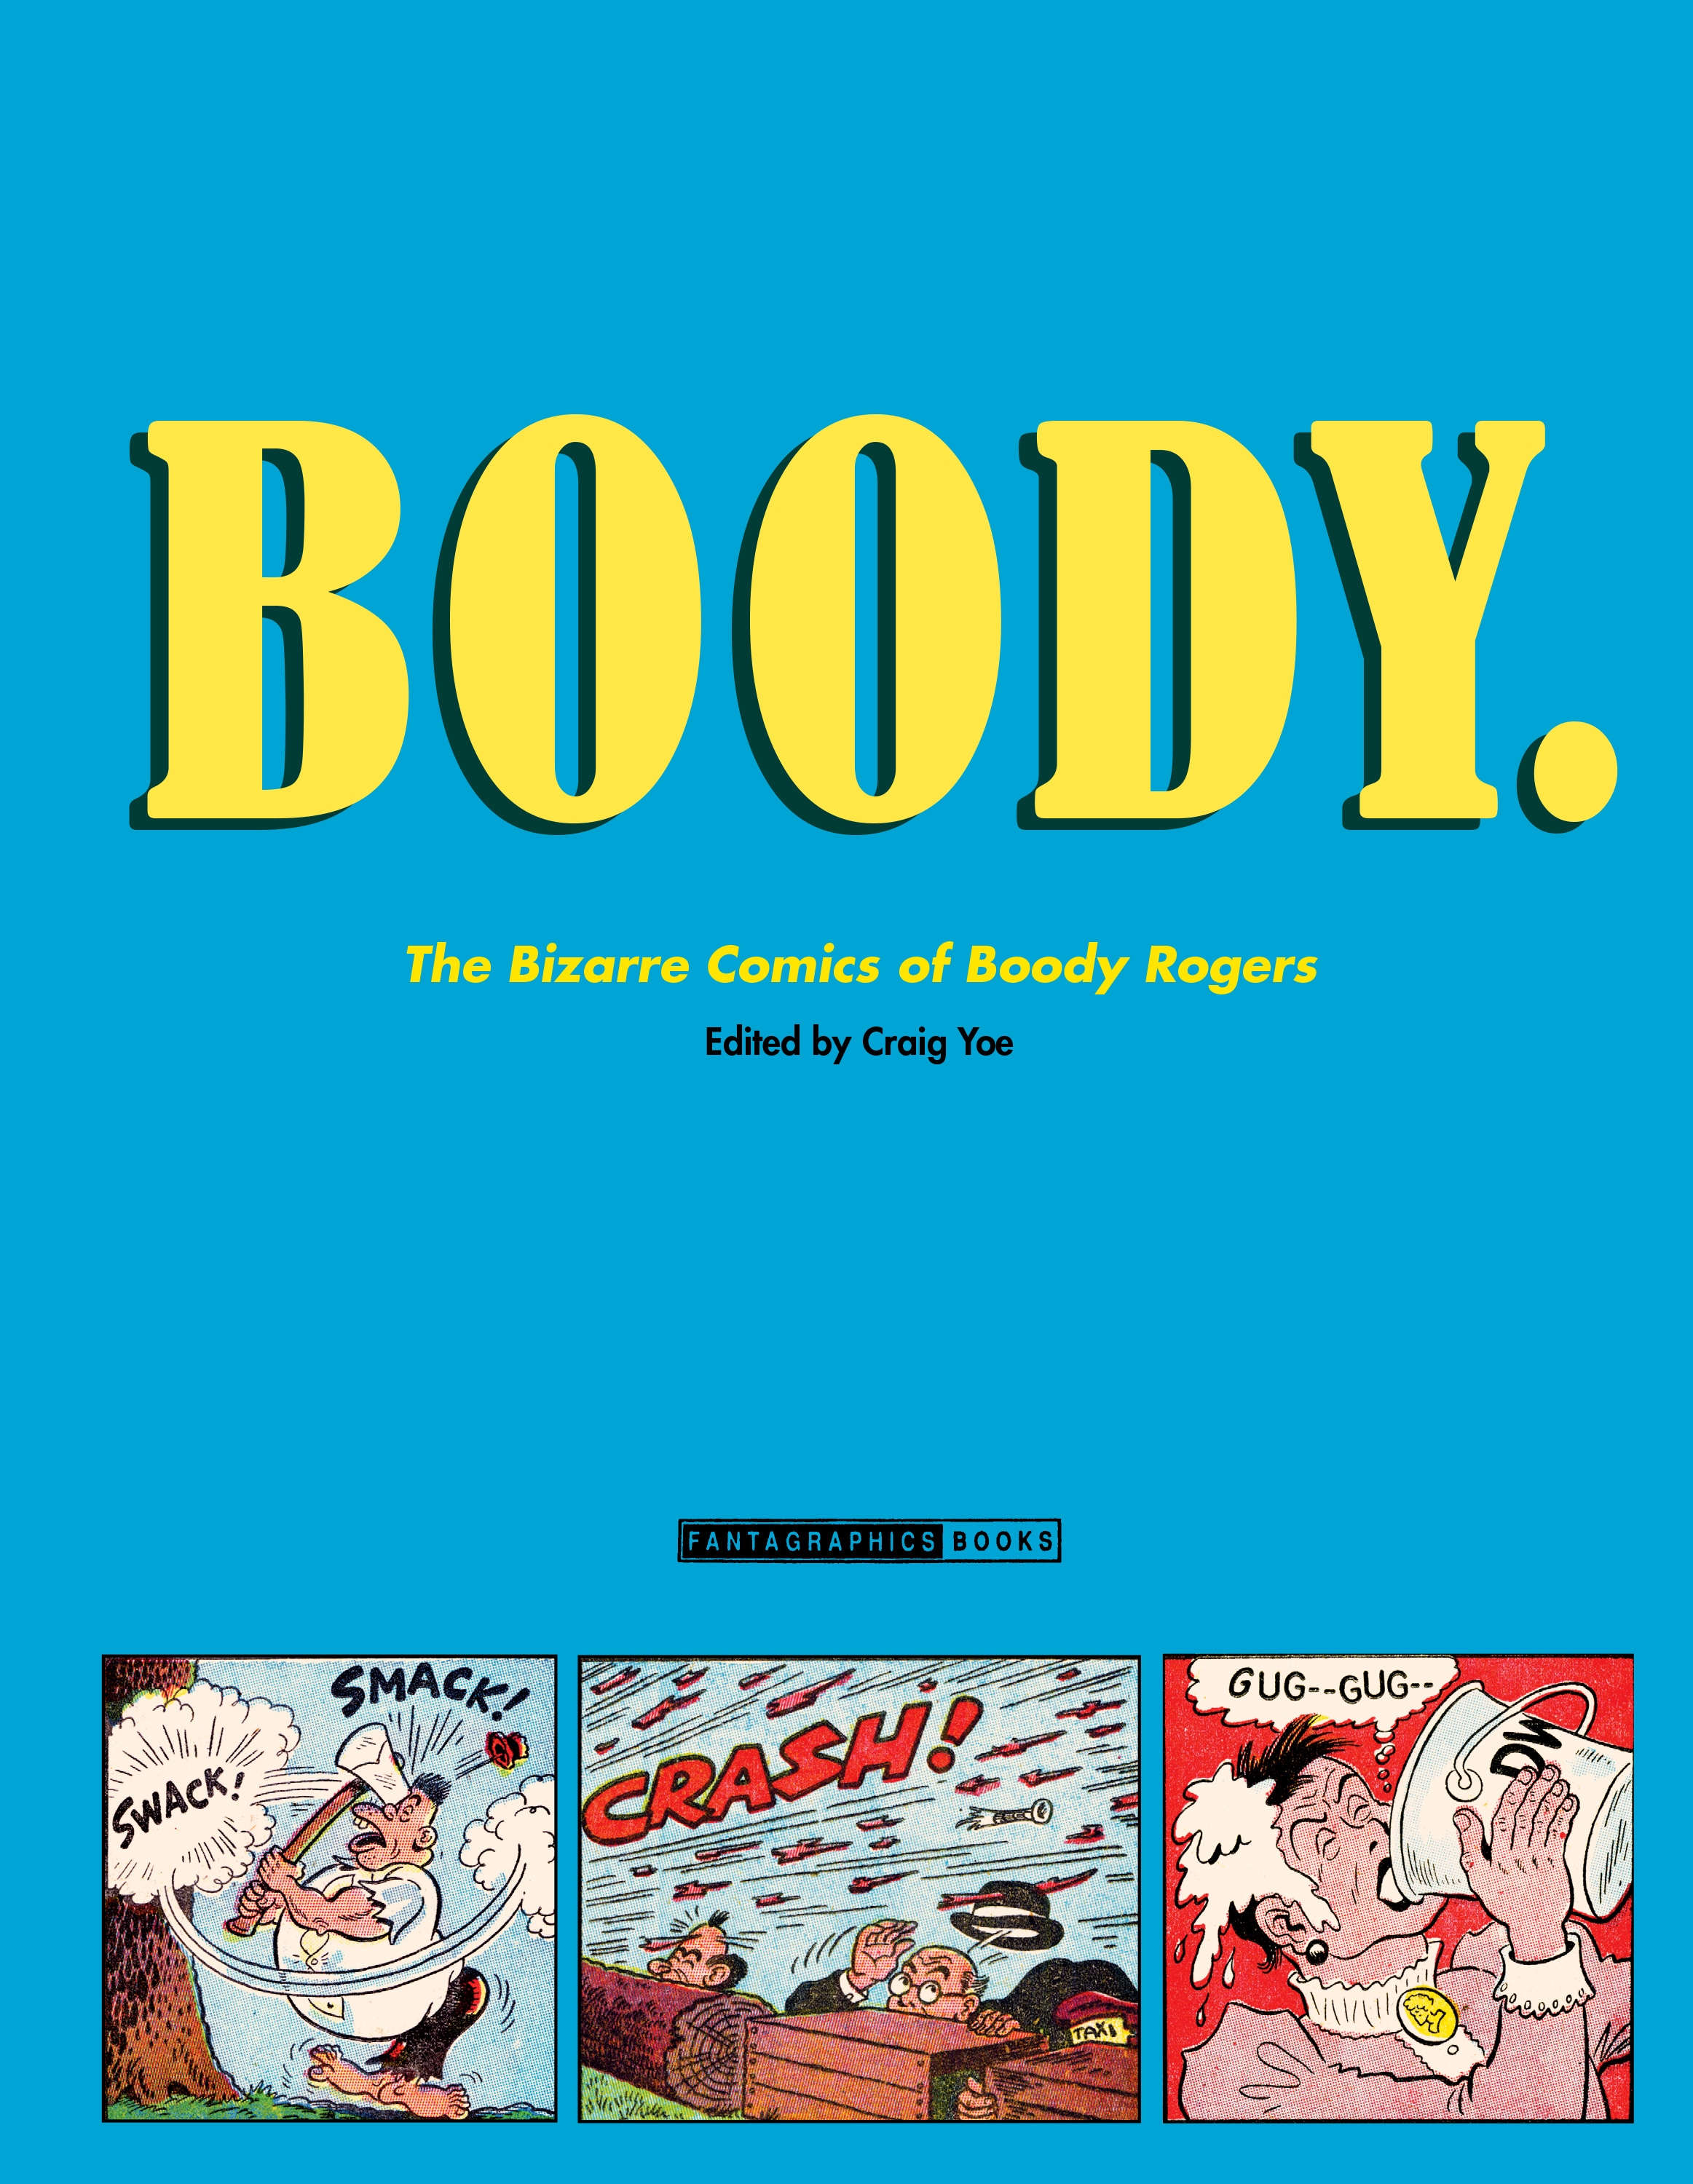 Read online Boody. comic -  Issue # TPB - 4